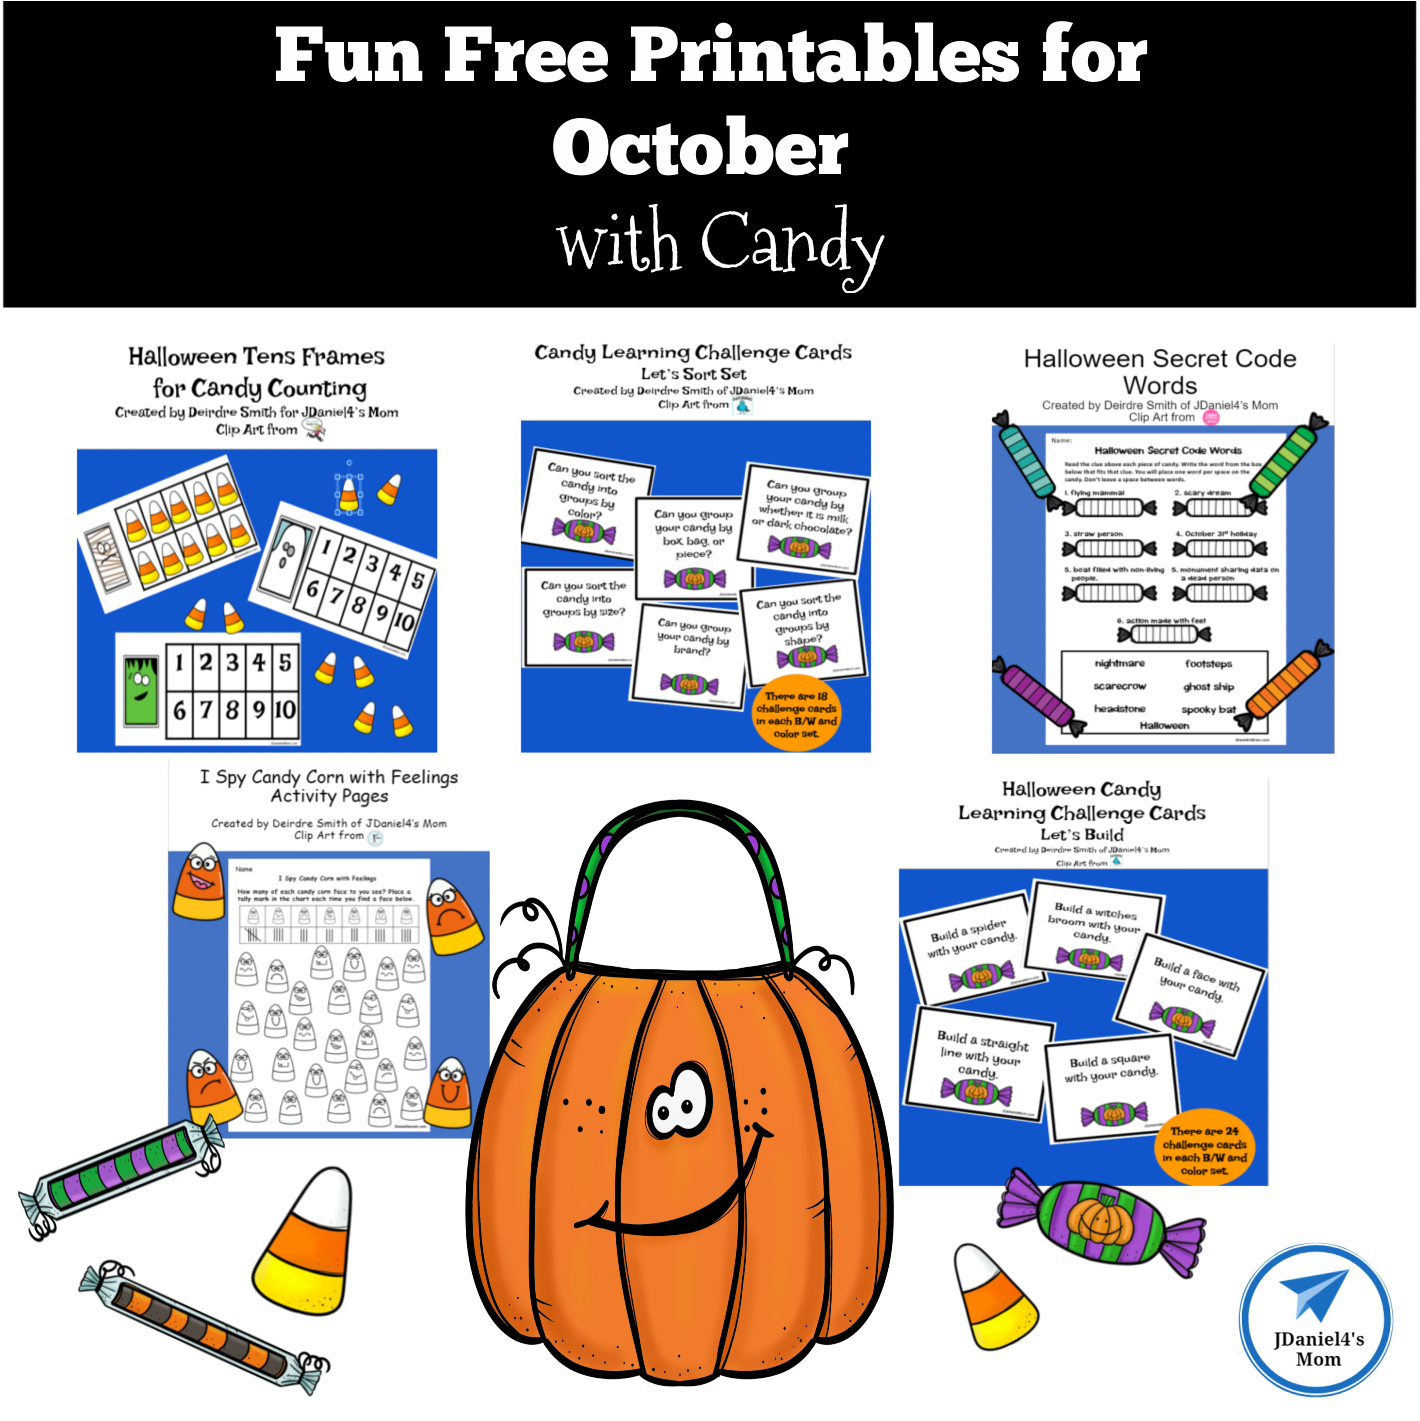 Fun Free Printables for October with Candy